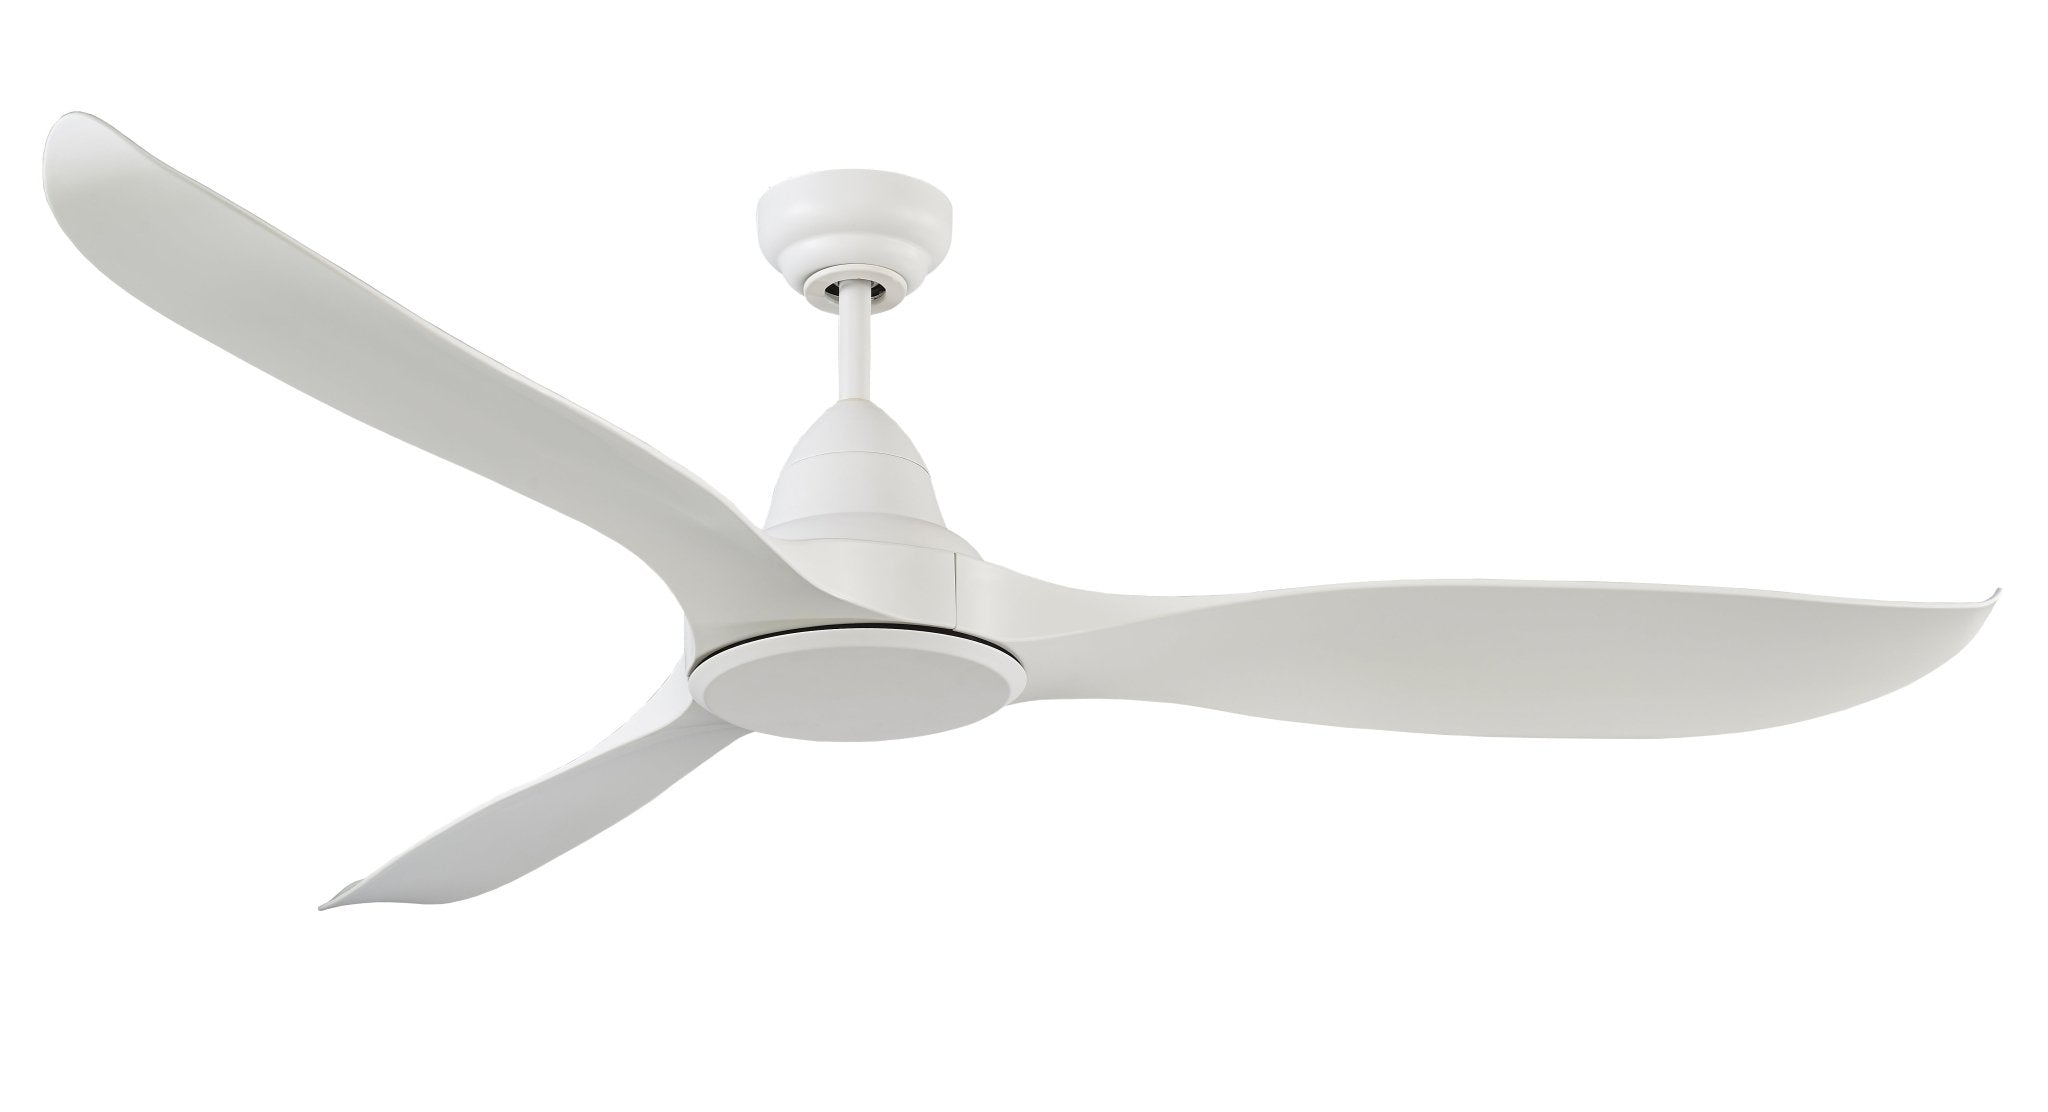 52" (1320mm) Wave DC Ceiling Fan White, Only With 3 ABS Blade & Remote Control - Mases LightingMartec